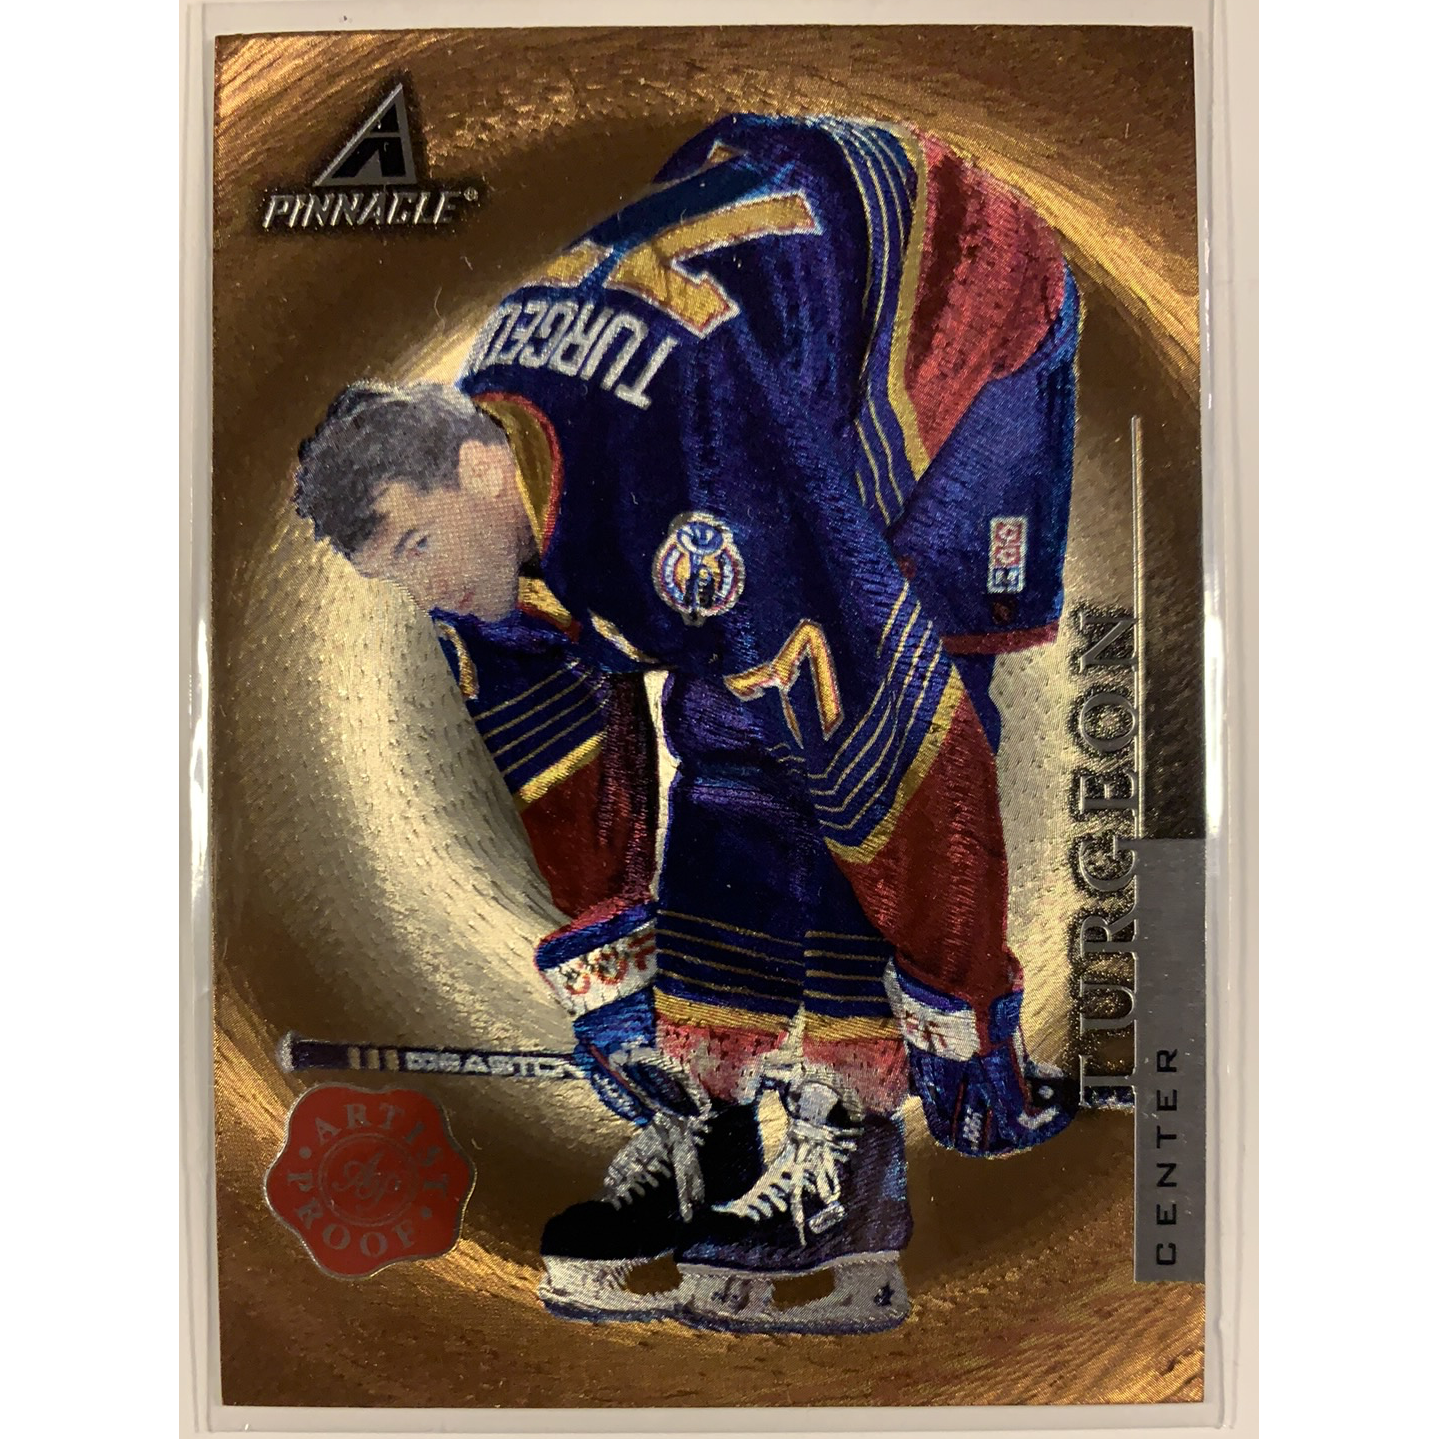  1997-98 Pinnacle Pierre Turgeon Artist Proof  Local Legends Cards & Collectibles